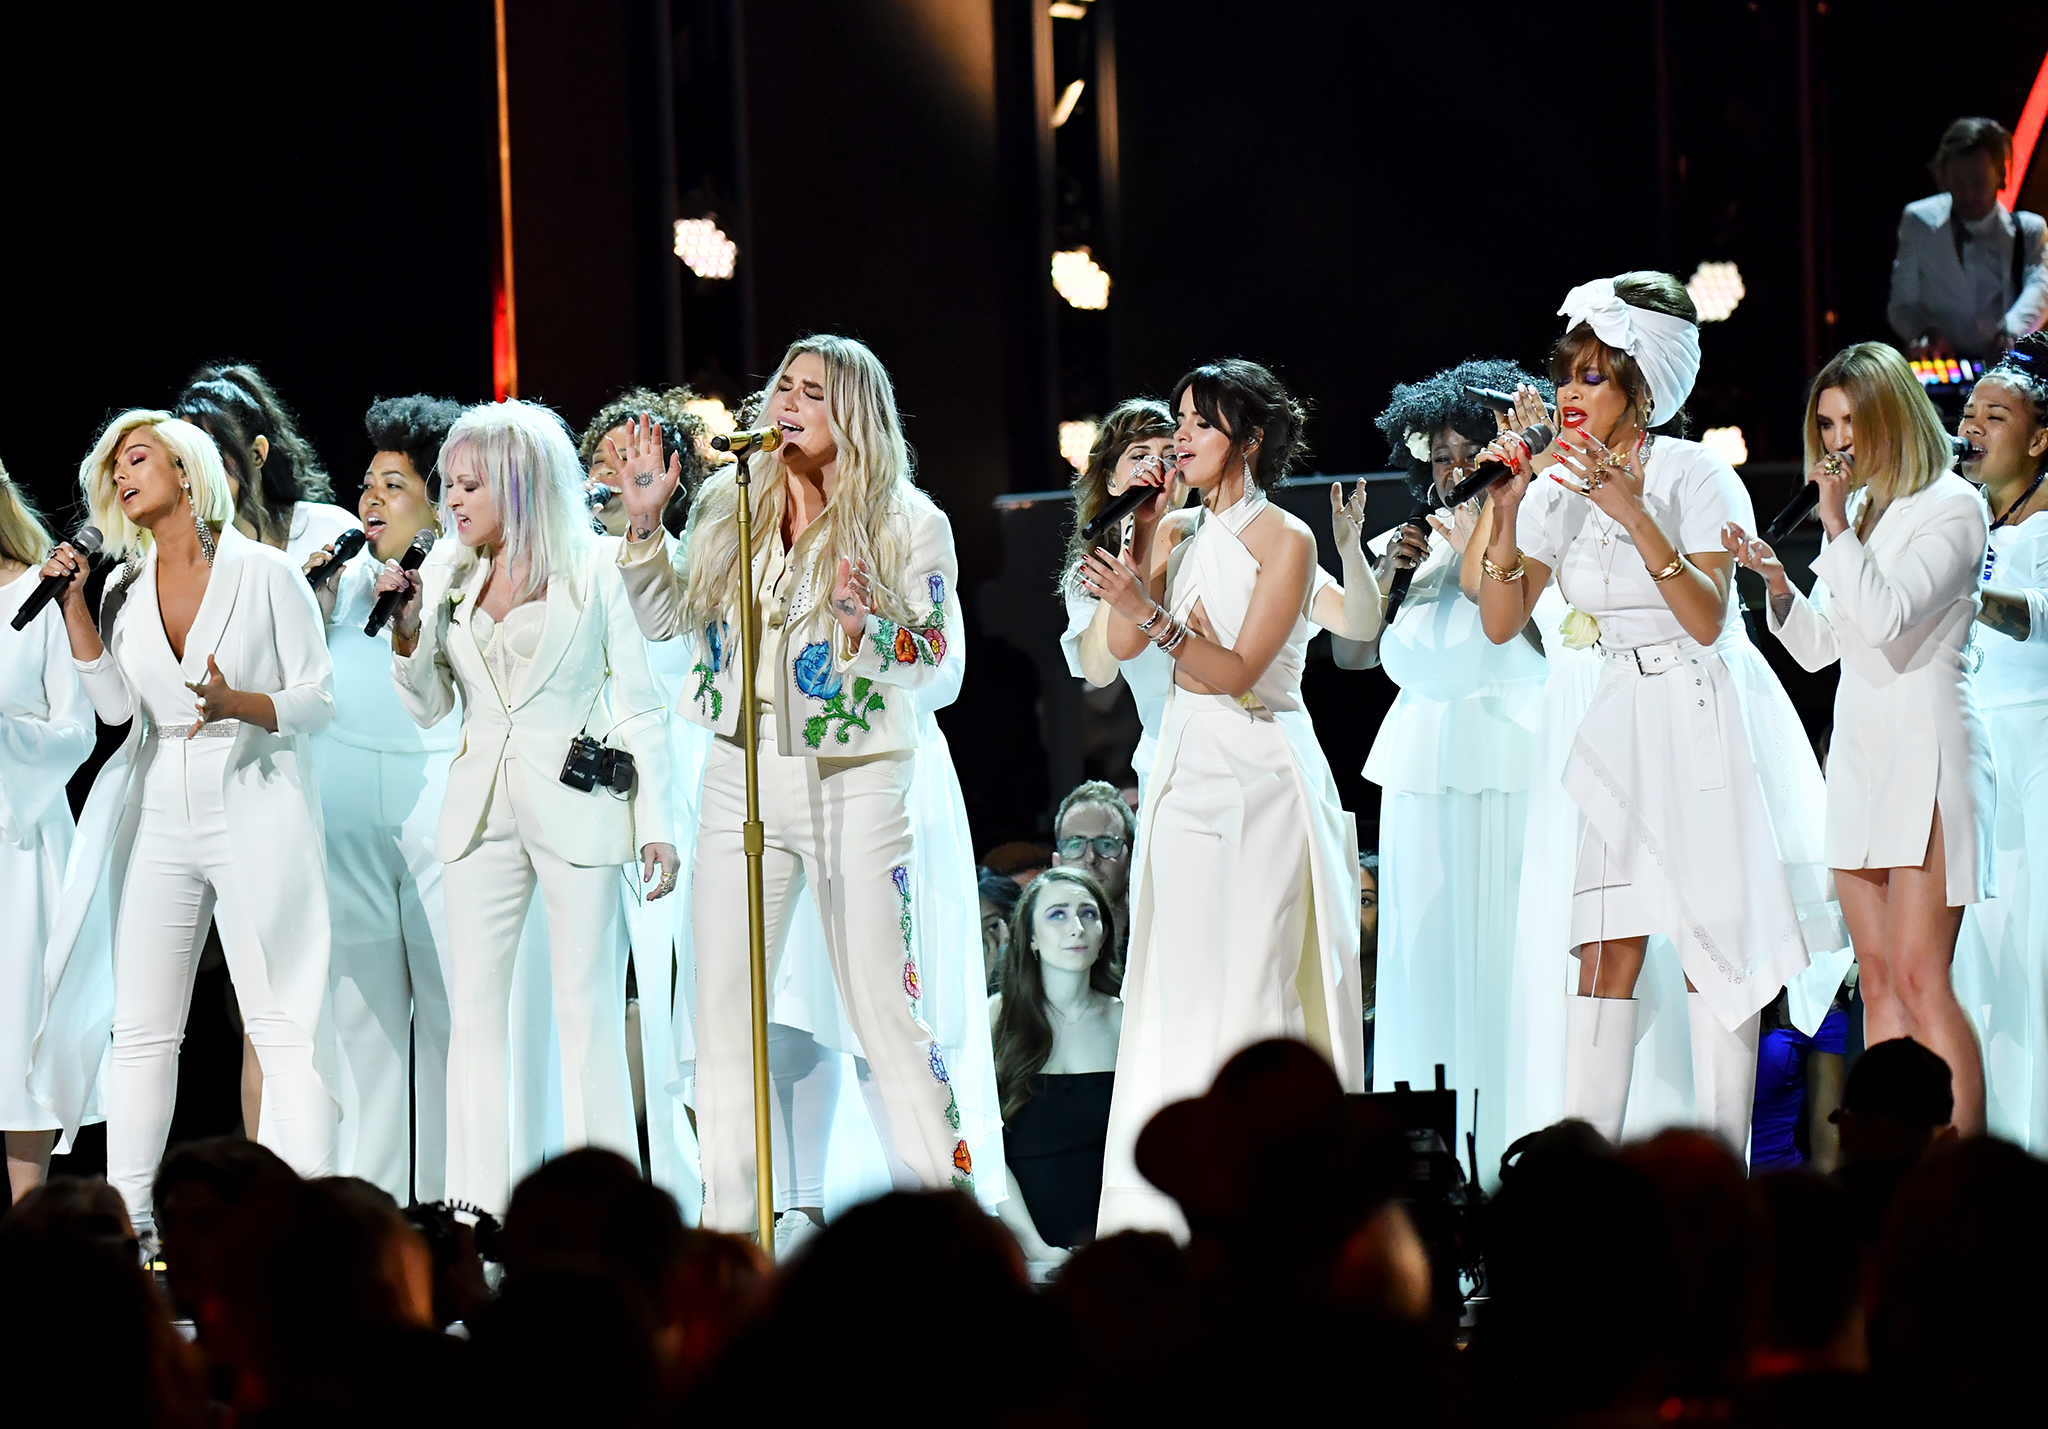 Recording artists Bebe Rexha, Cyndi Lauper, Kesha, Camila Cabello, Andra Day and Julia Michaels perform onstage during the 60th Annual GRAMMY Awards at Madison Square Garden on January 28, 2018 in New York City. (Jeff Kravitz—FilmMagic/Getty Images)